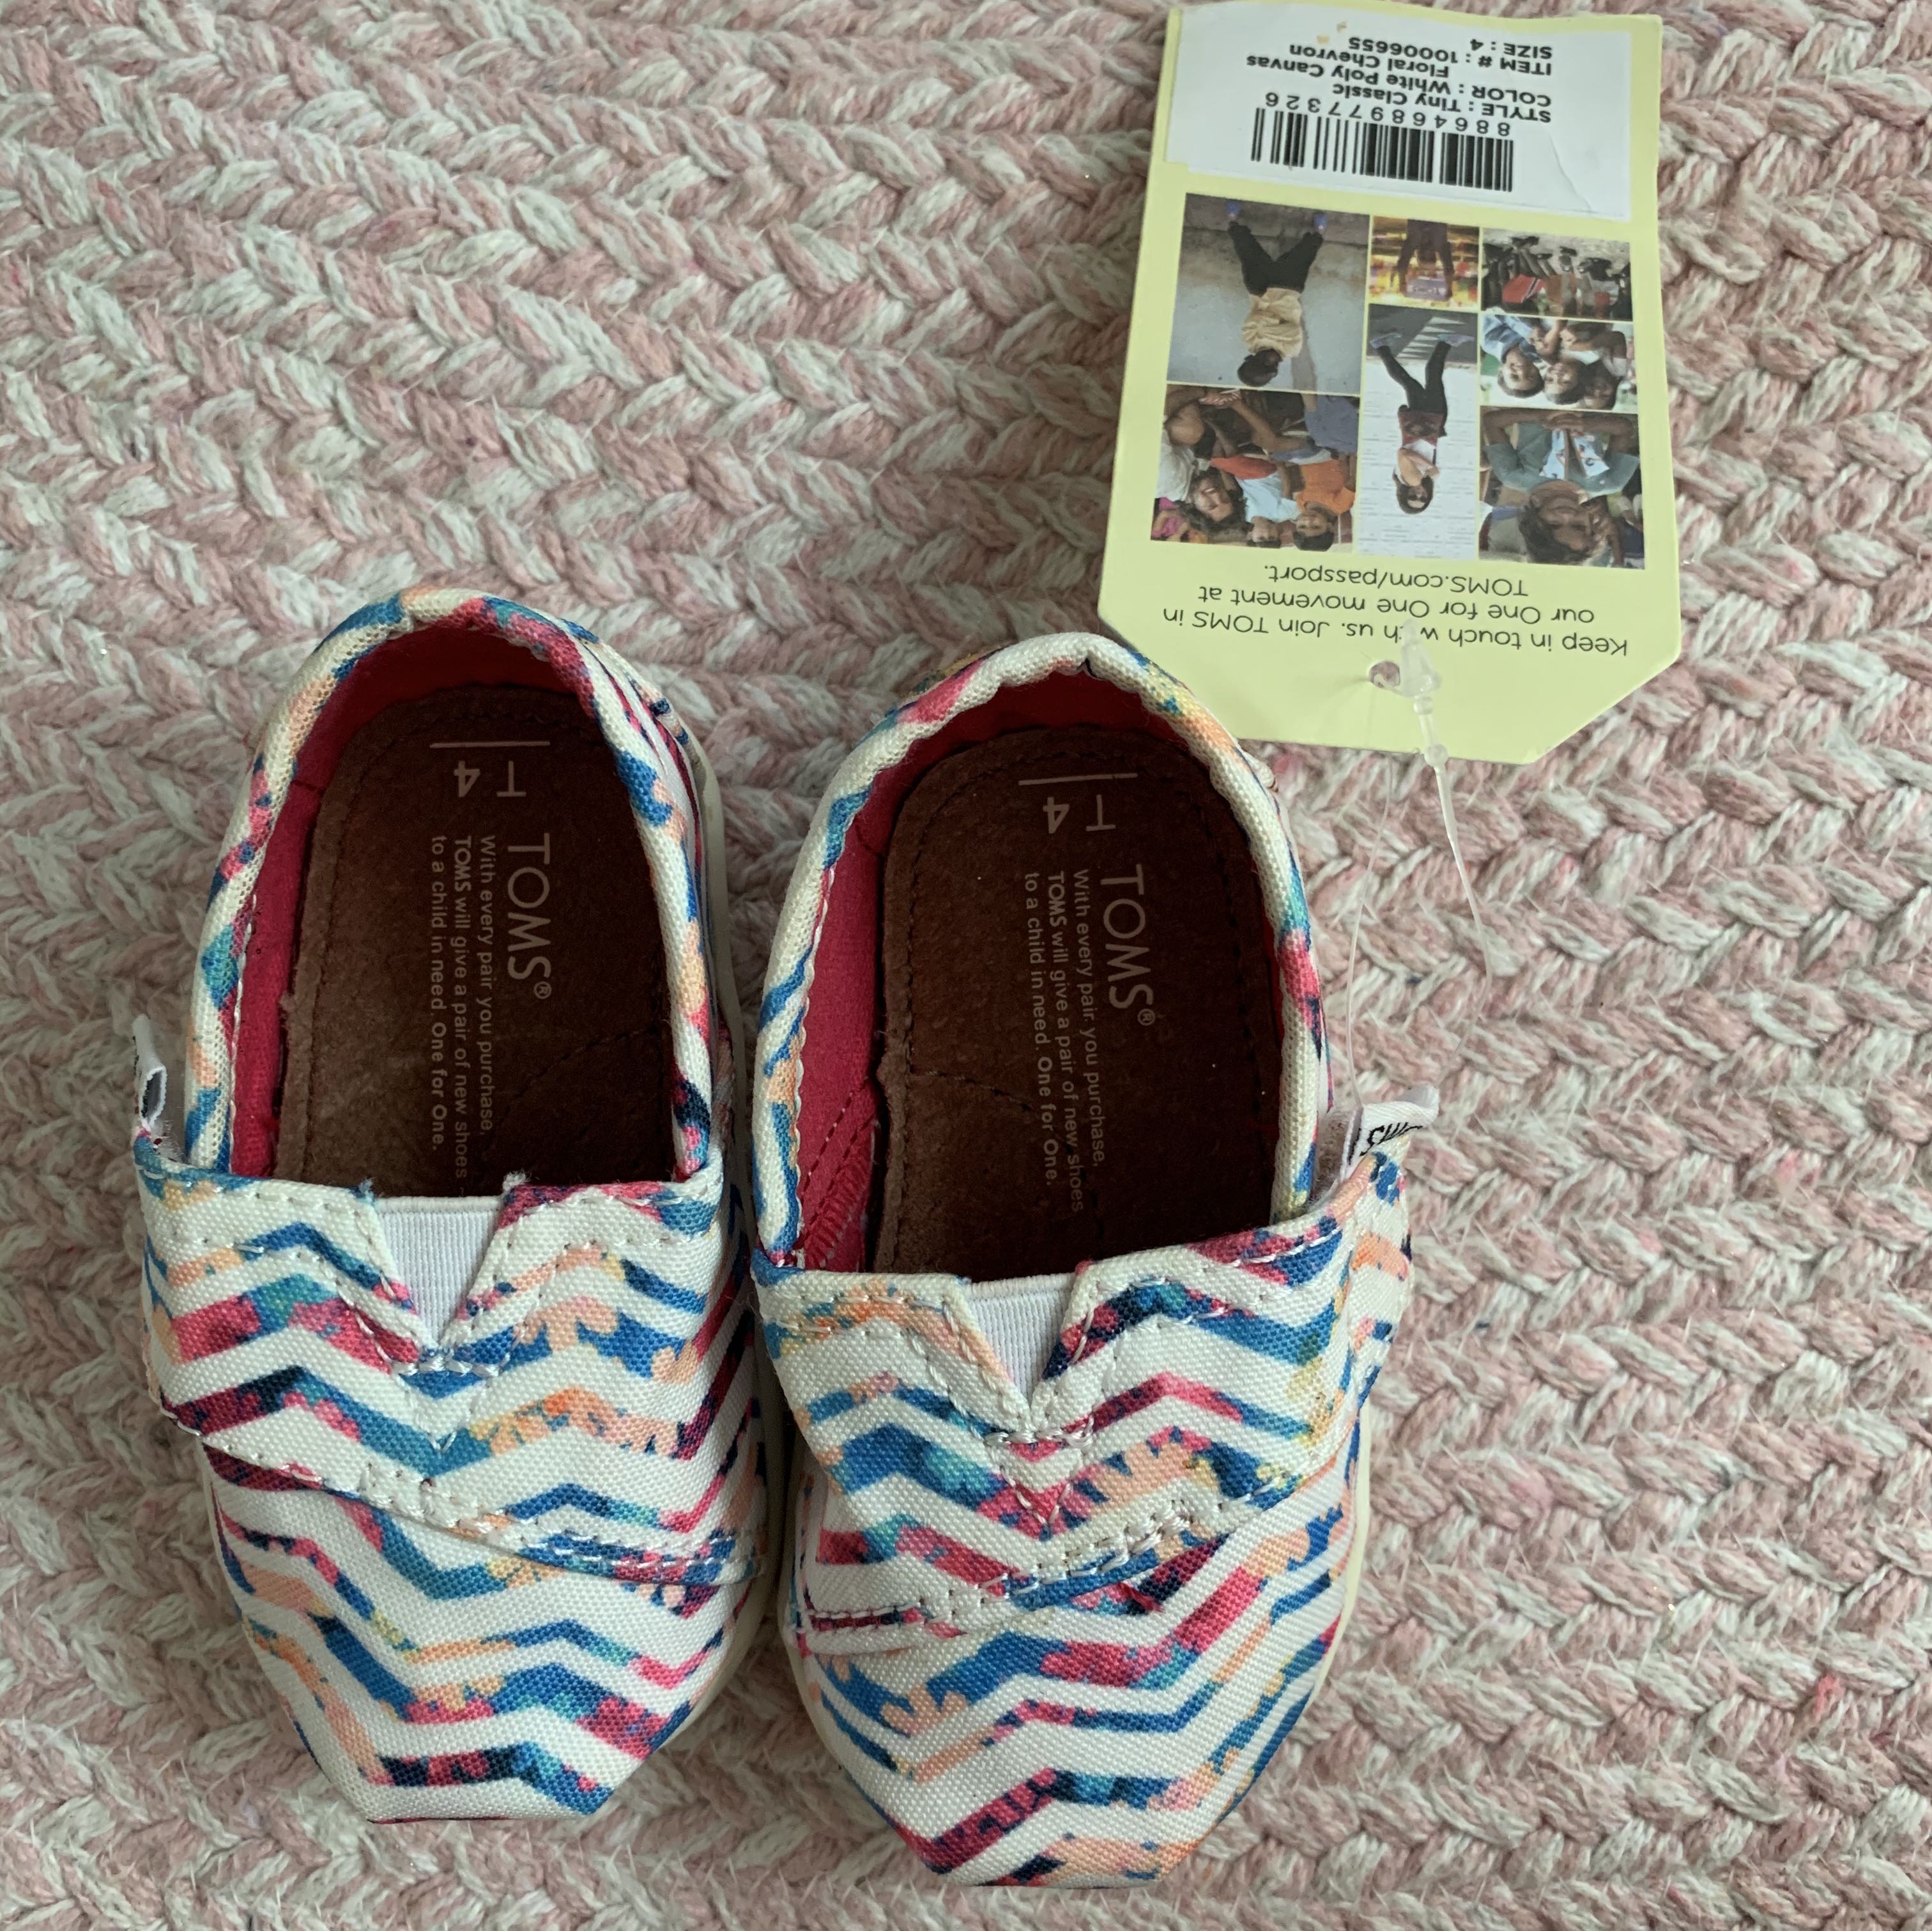 toms baby shoe sizes